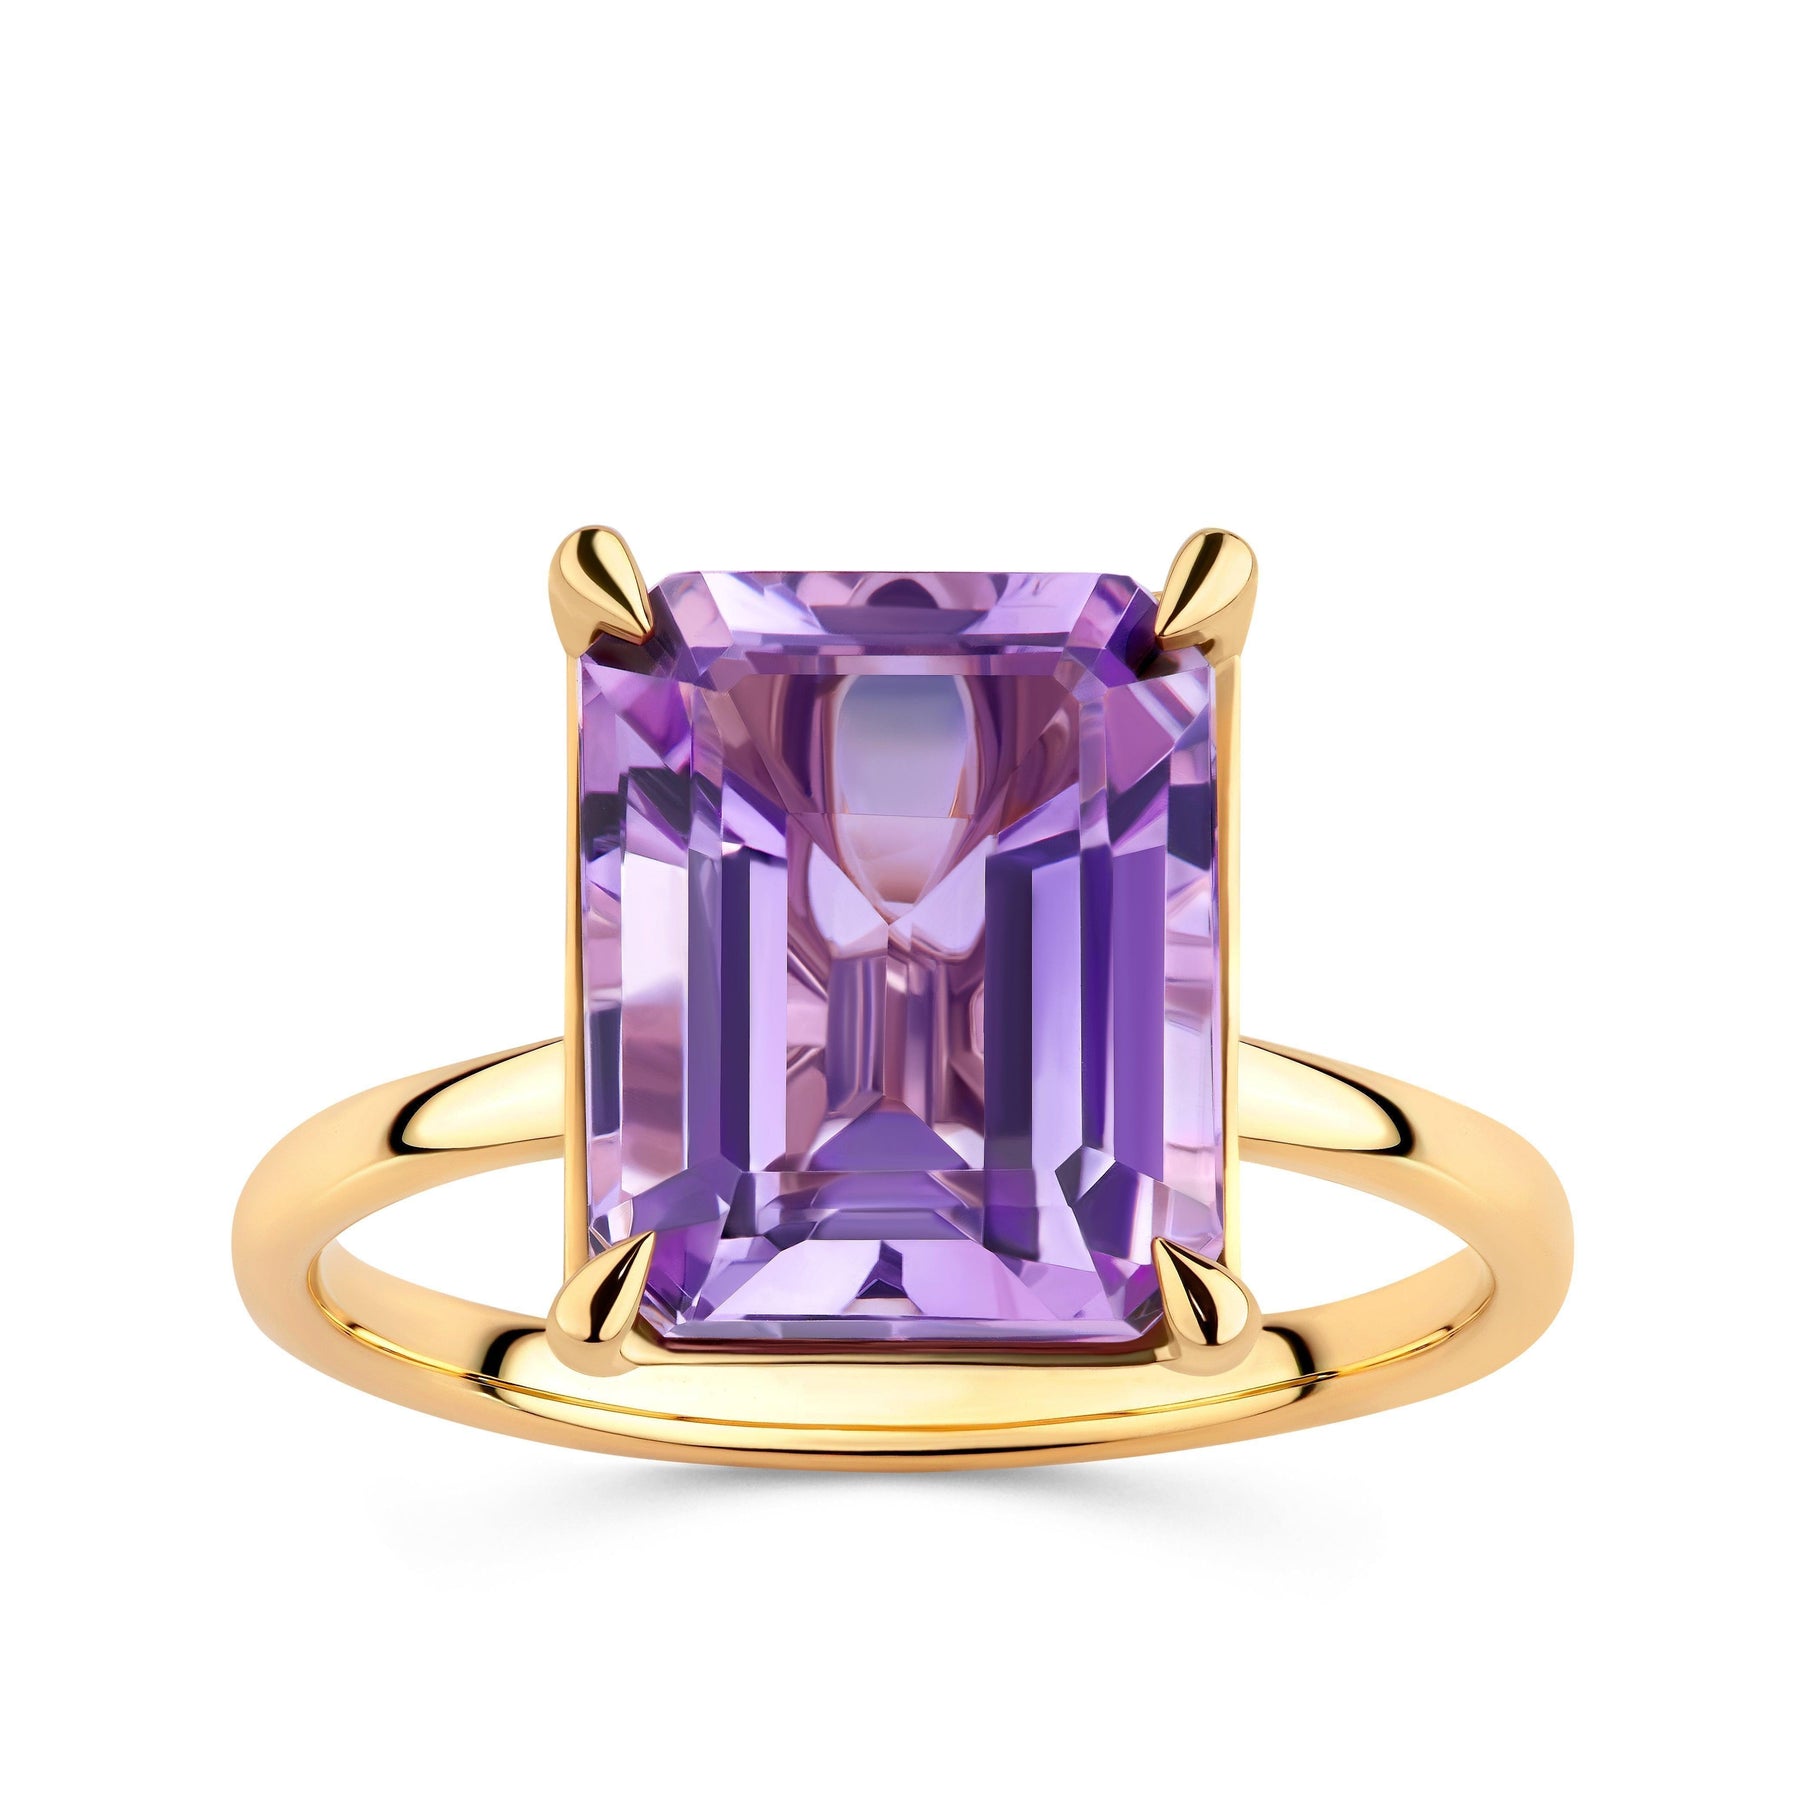 Emerald Cut Amethyst Cocktail Ring in 9ct Yellow Gold